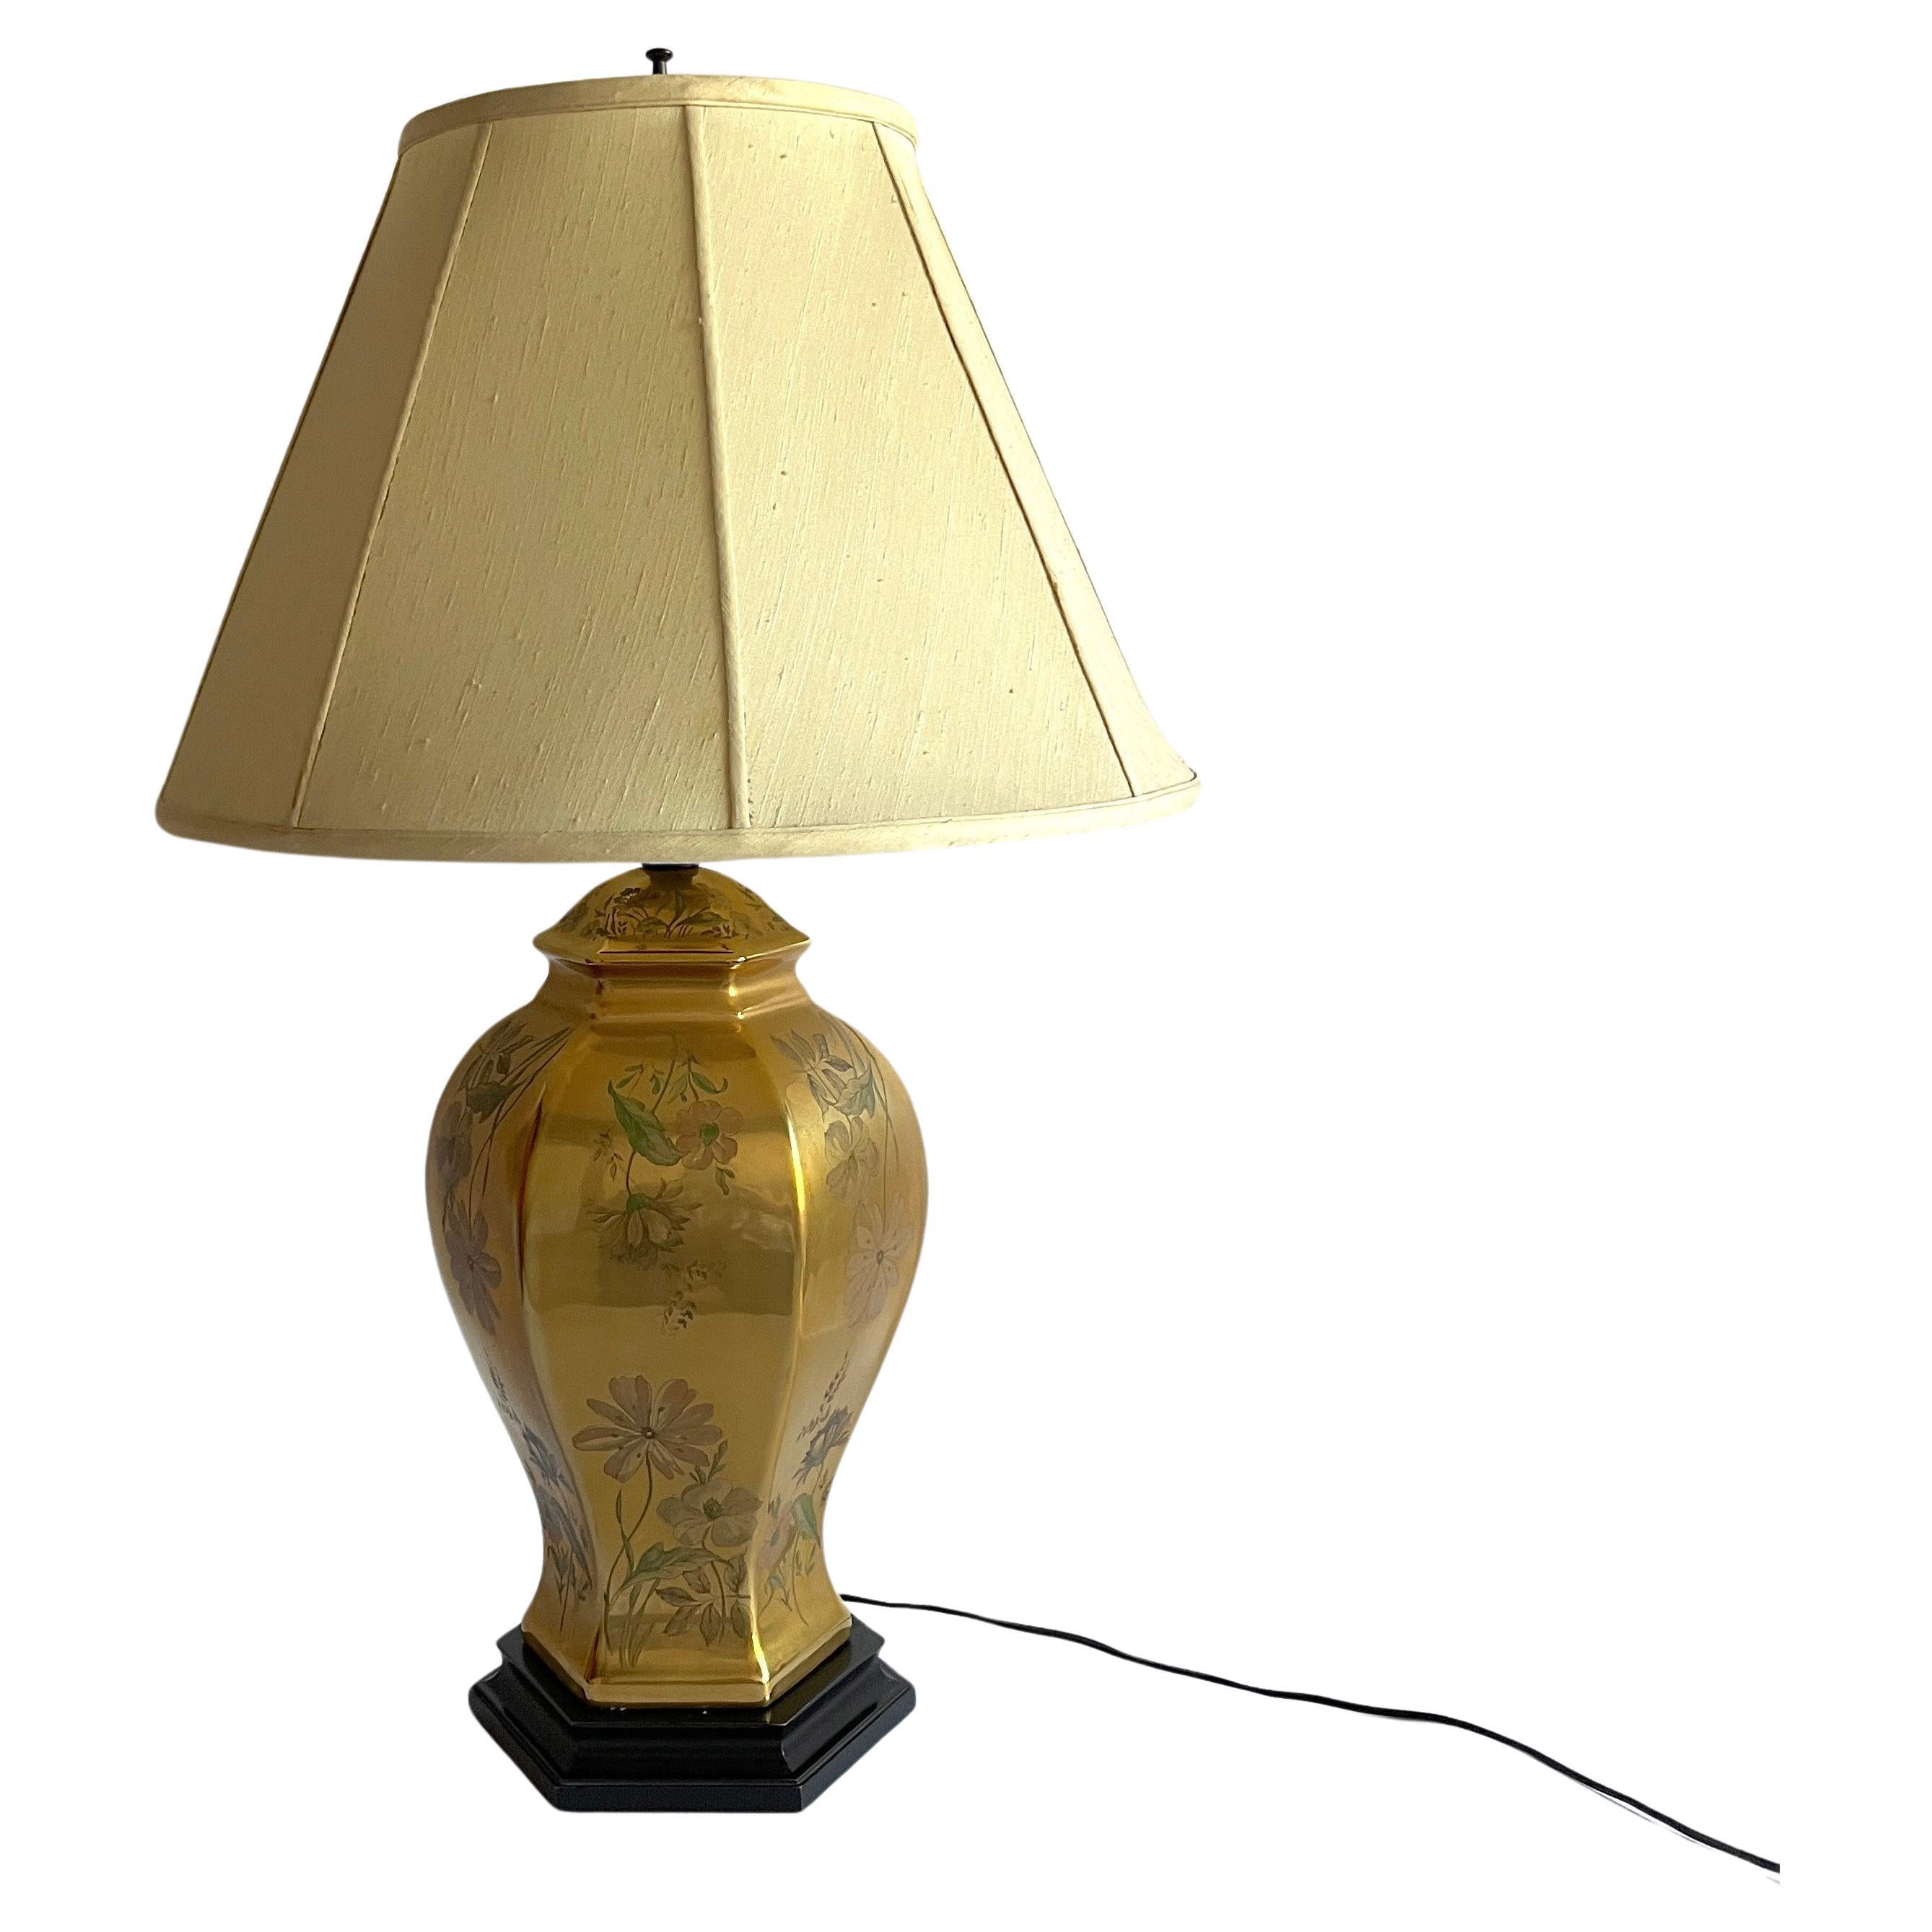 Exceptional table lamp made of gold color porcelain hand-painted with floral and vines motifs mounted on a solid wood base. A beautiful object of art for display. Includes original off-white (with a slight chartreuse-y green tint) and finial -- but